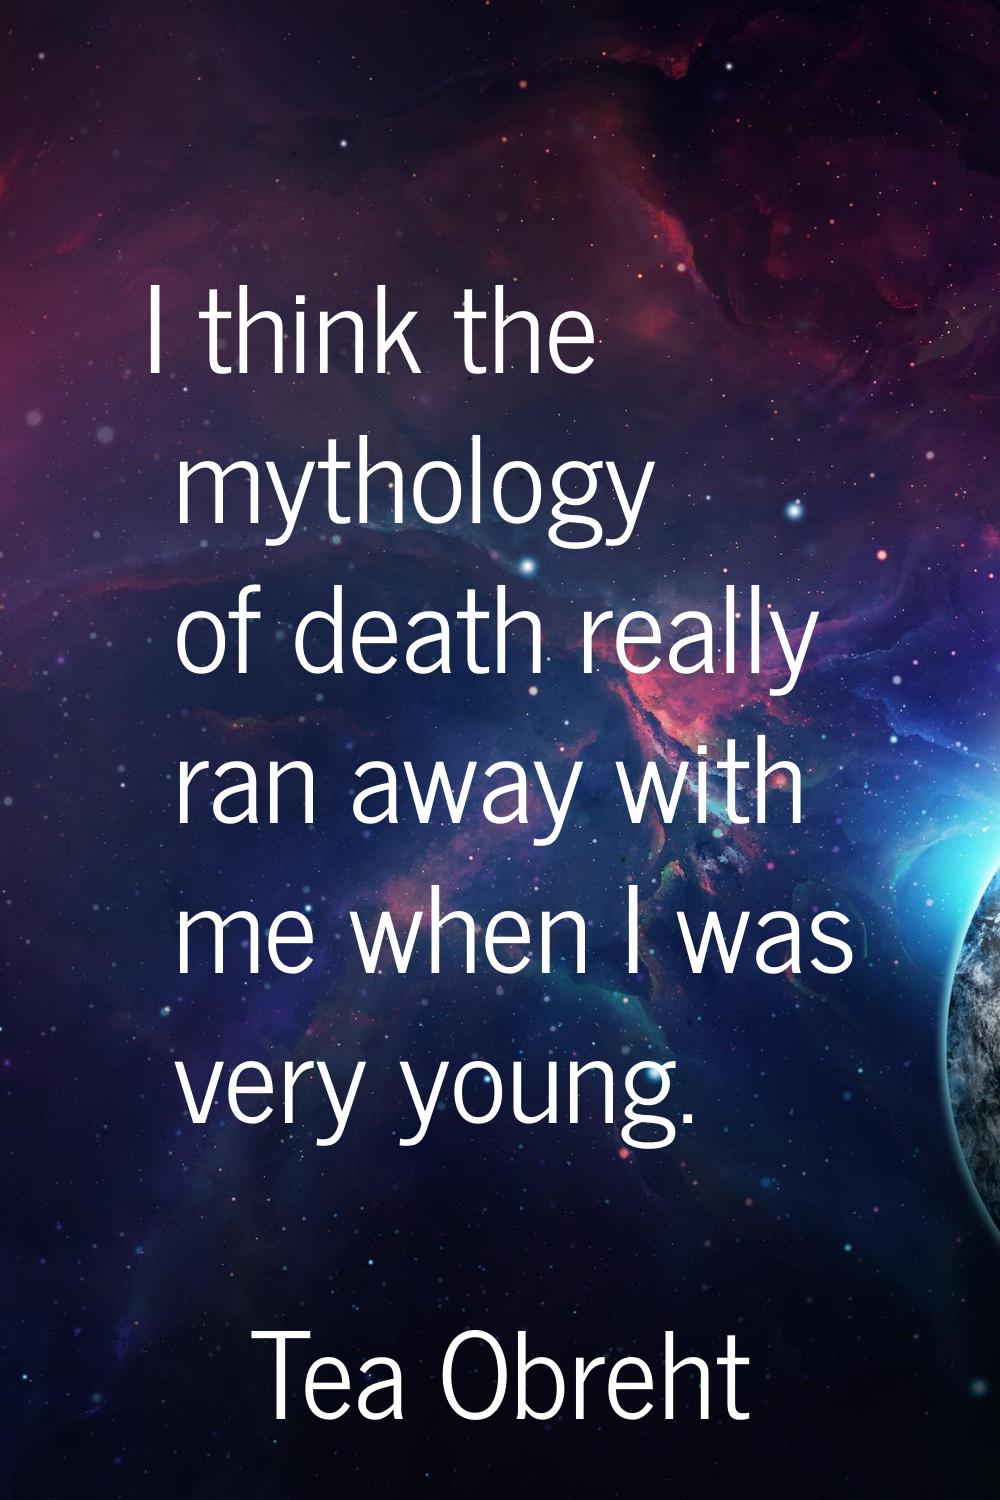 I think the mythology of death really ran away with me when I was very young.